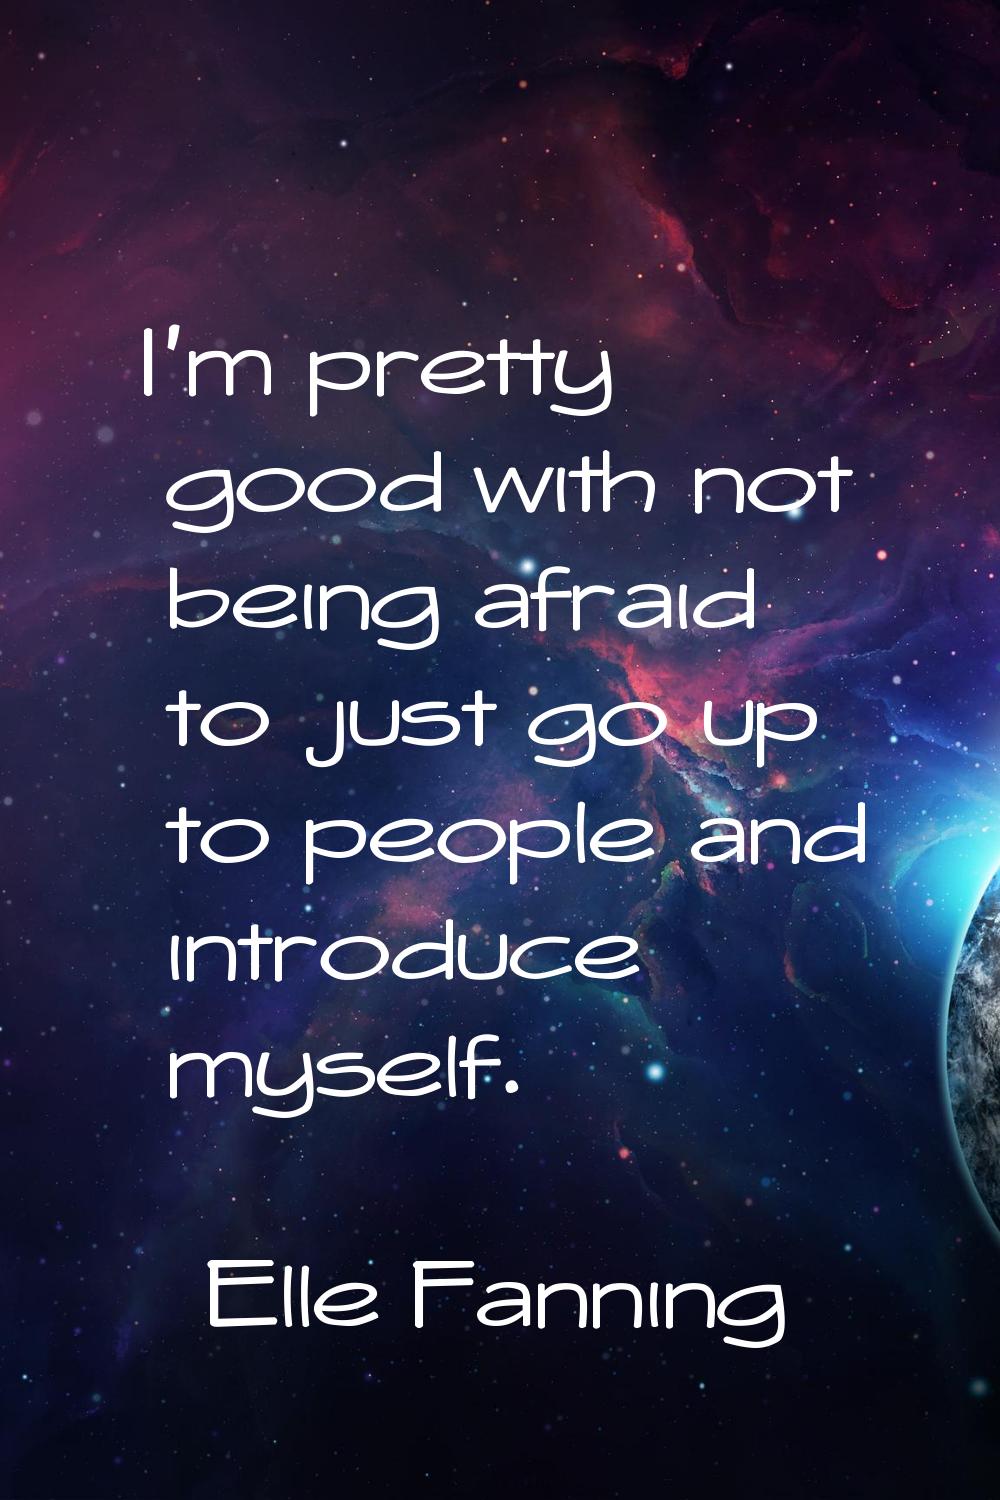 I'm pretty good with not being afraid to just go up to people and introduce myself.